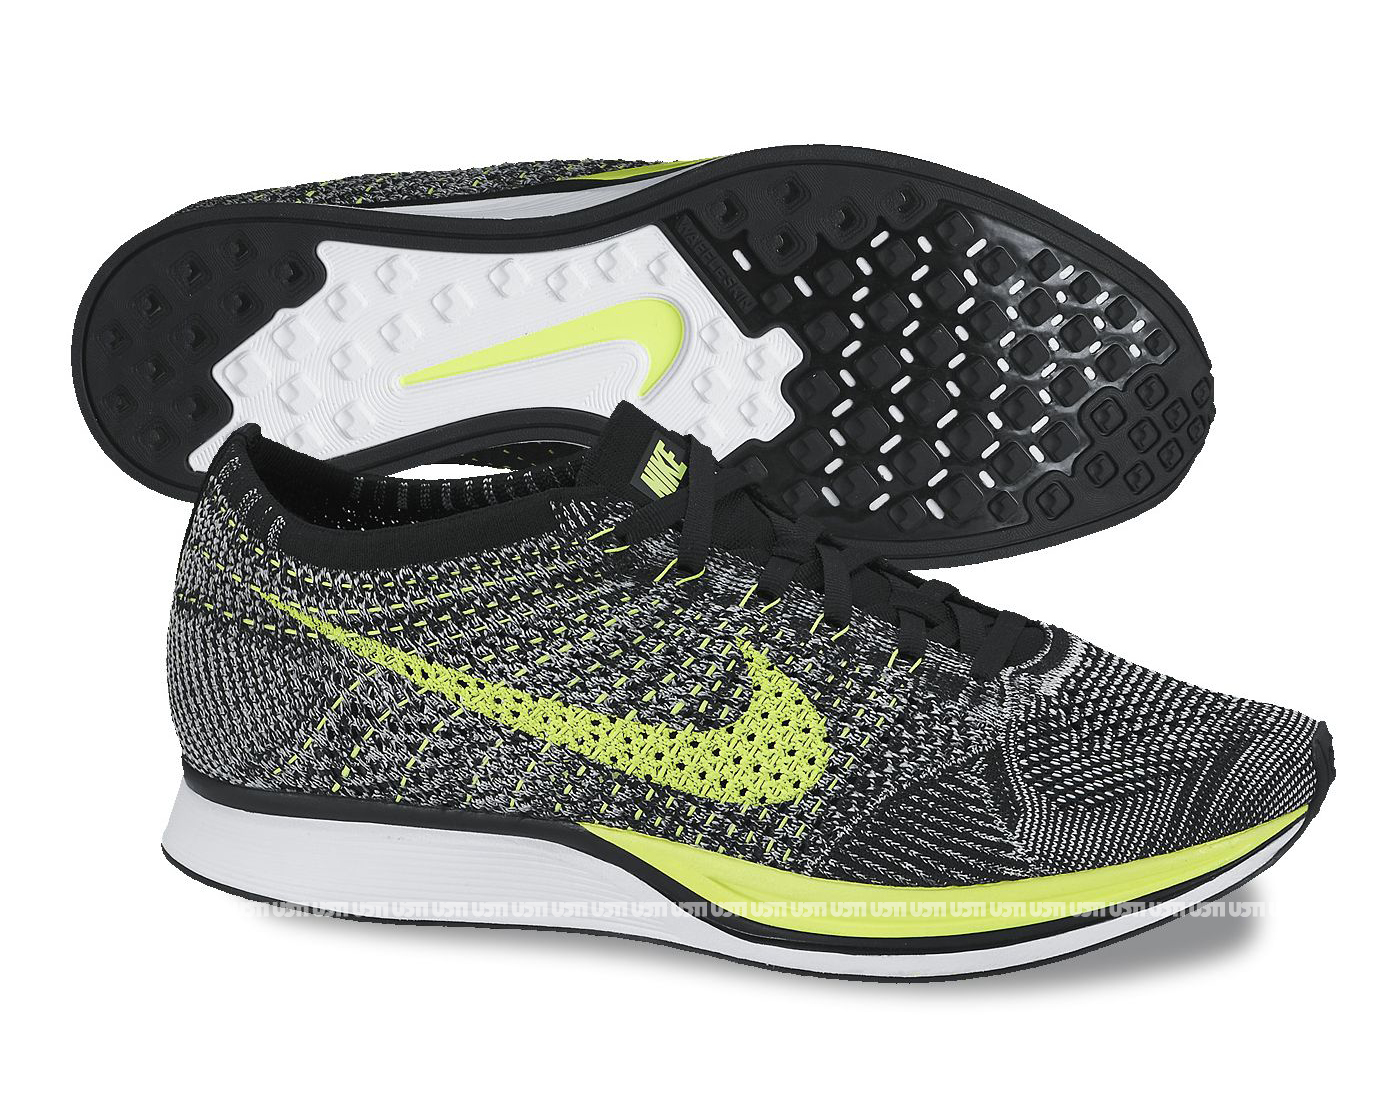 Nike Flyknit Racer - Sail / Volt / Black | Sole Collector